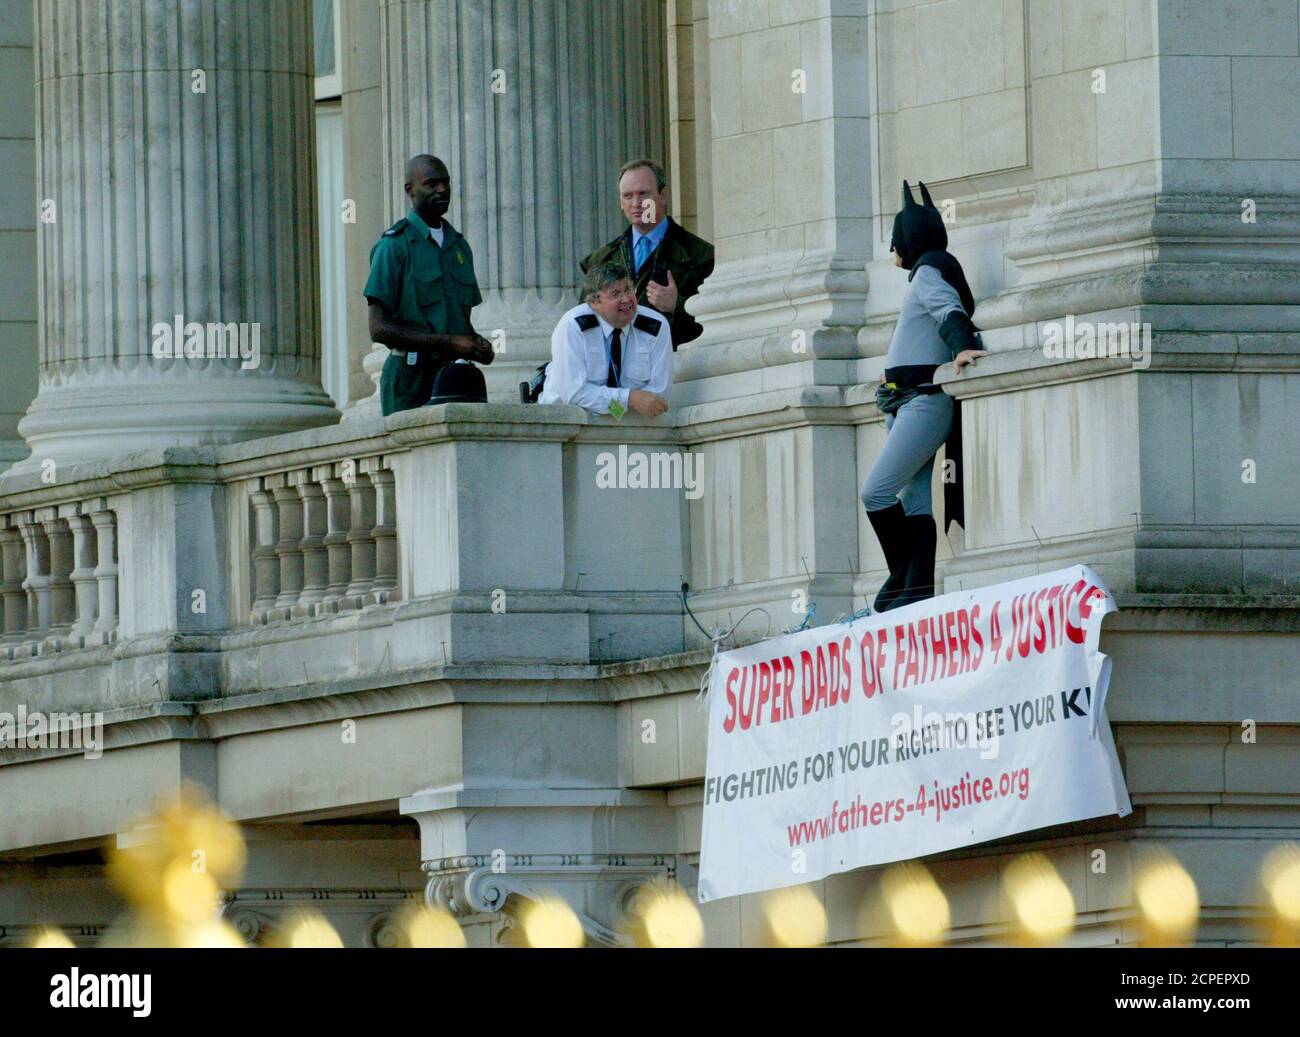 Security officers standby as father's rights campaigner Jason Hatch (R),  dressed as Batman, protests on a balcony at Buckingham Palace in London,  September 13, 2004. Hatch from the fathers' rights group that